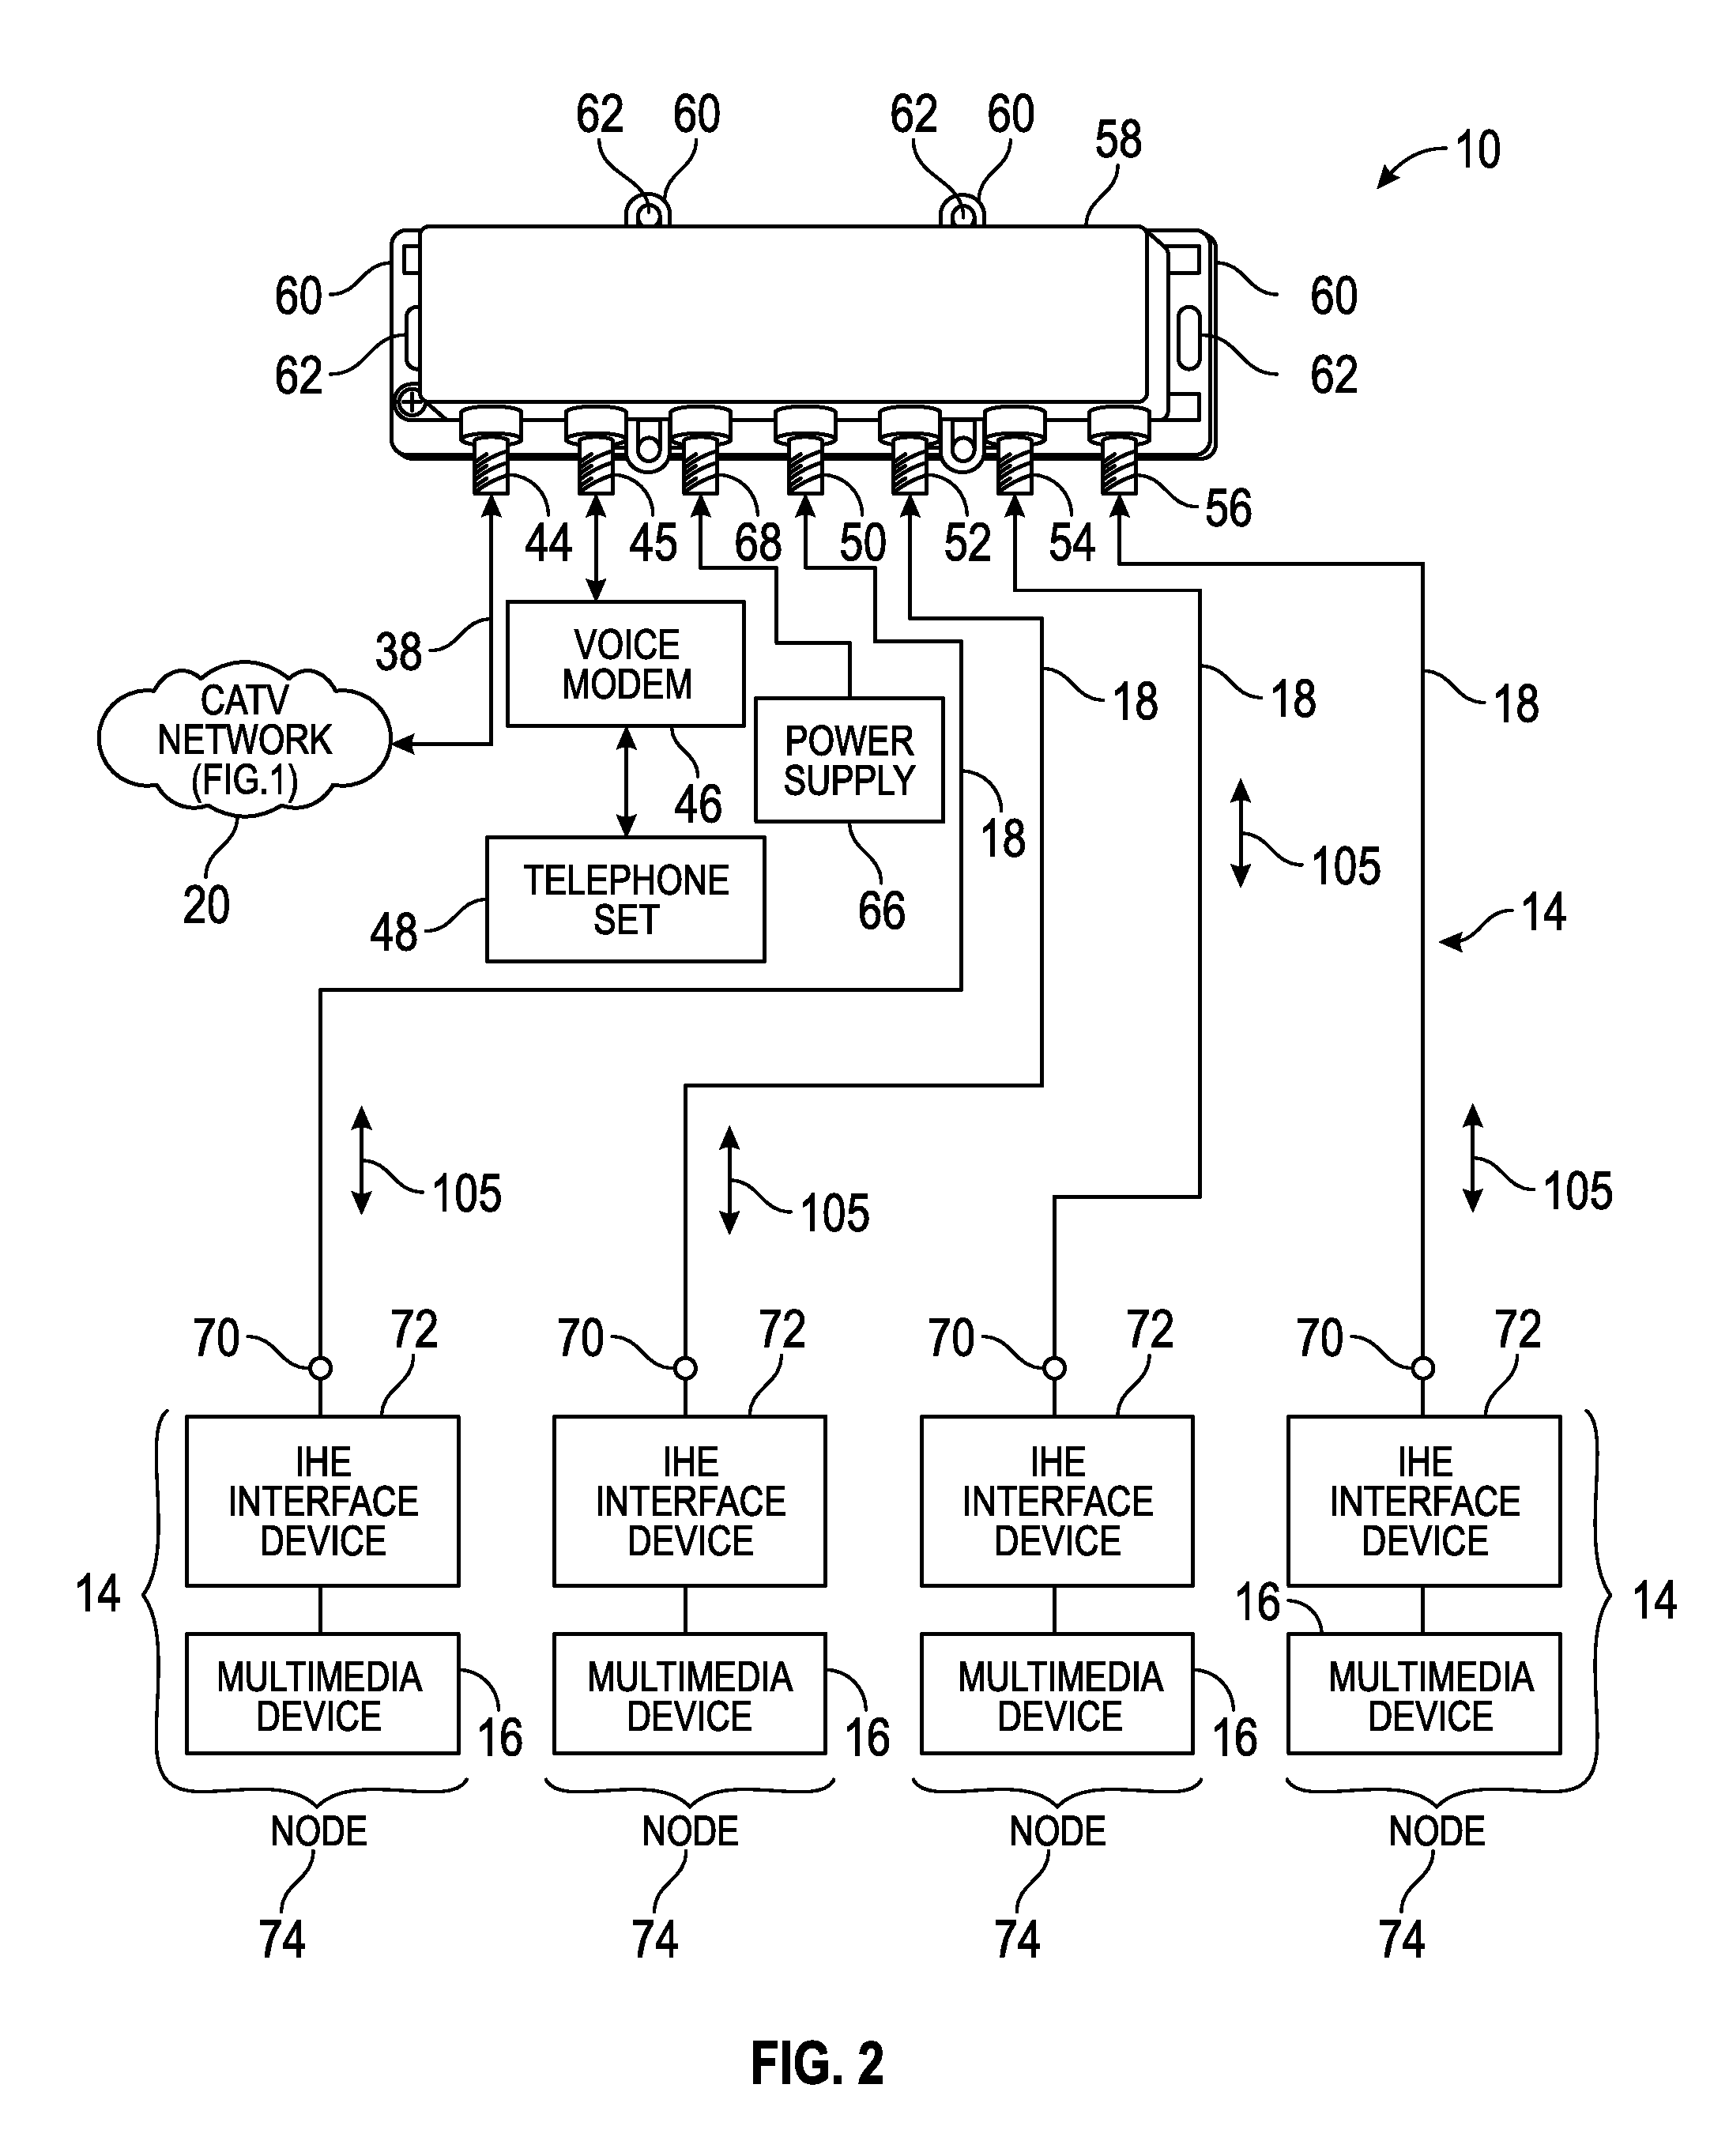 CATV Entry Adapter and Method for Distributing CATV and In-Home Entertainment Signals